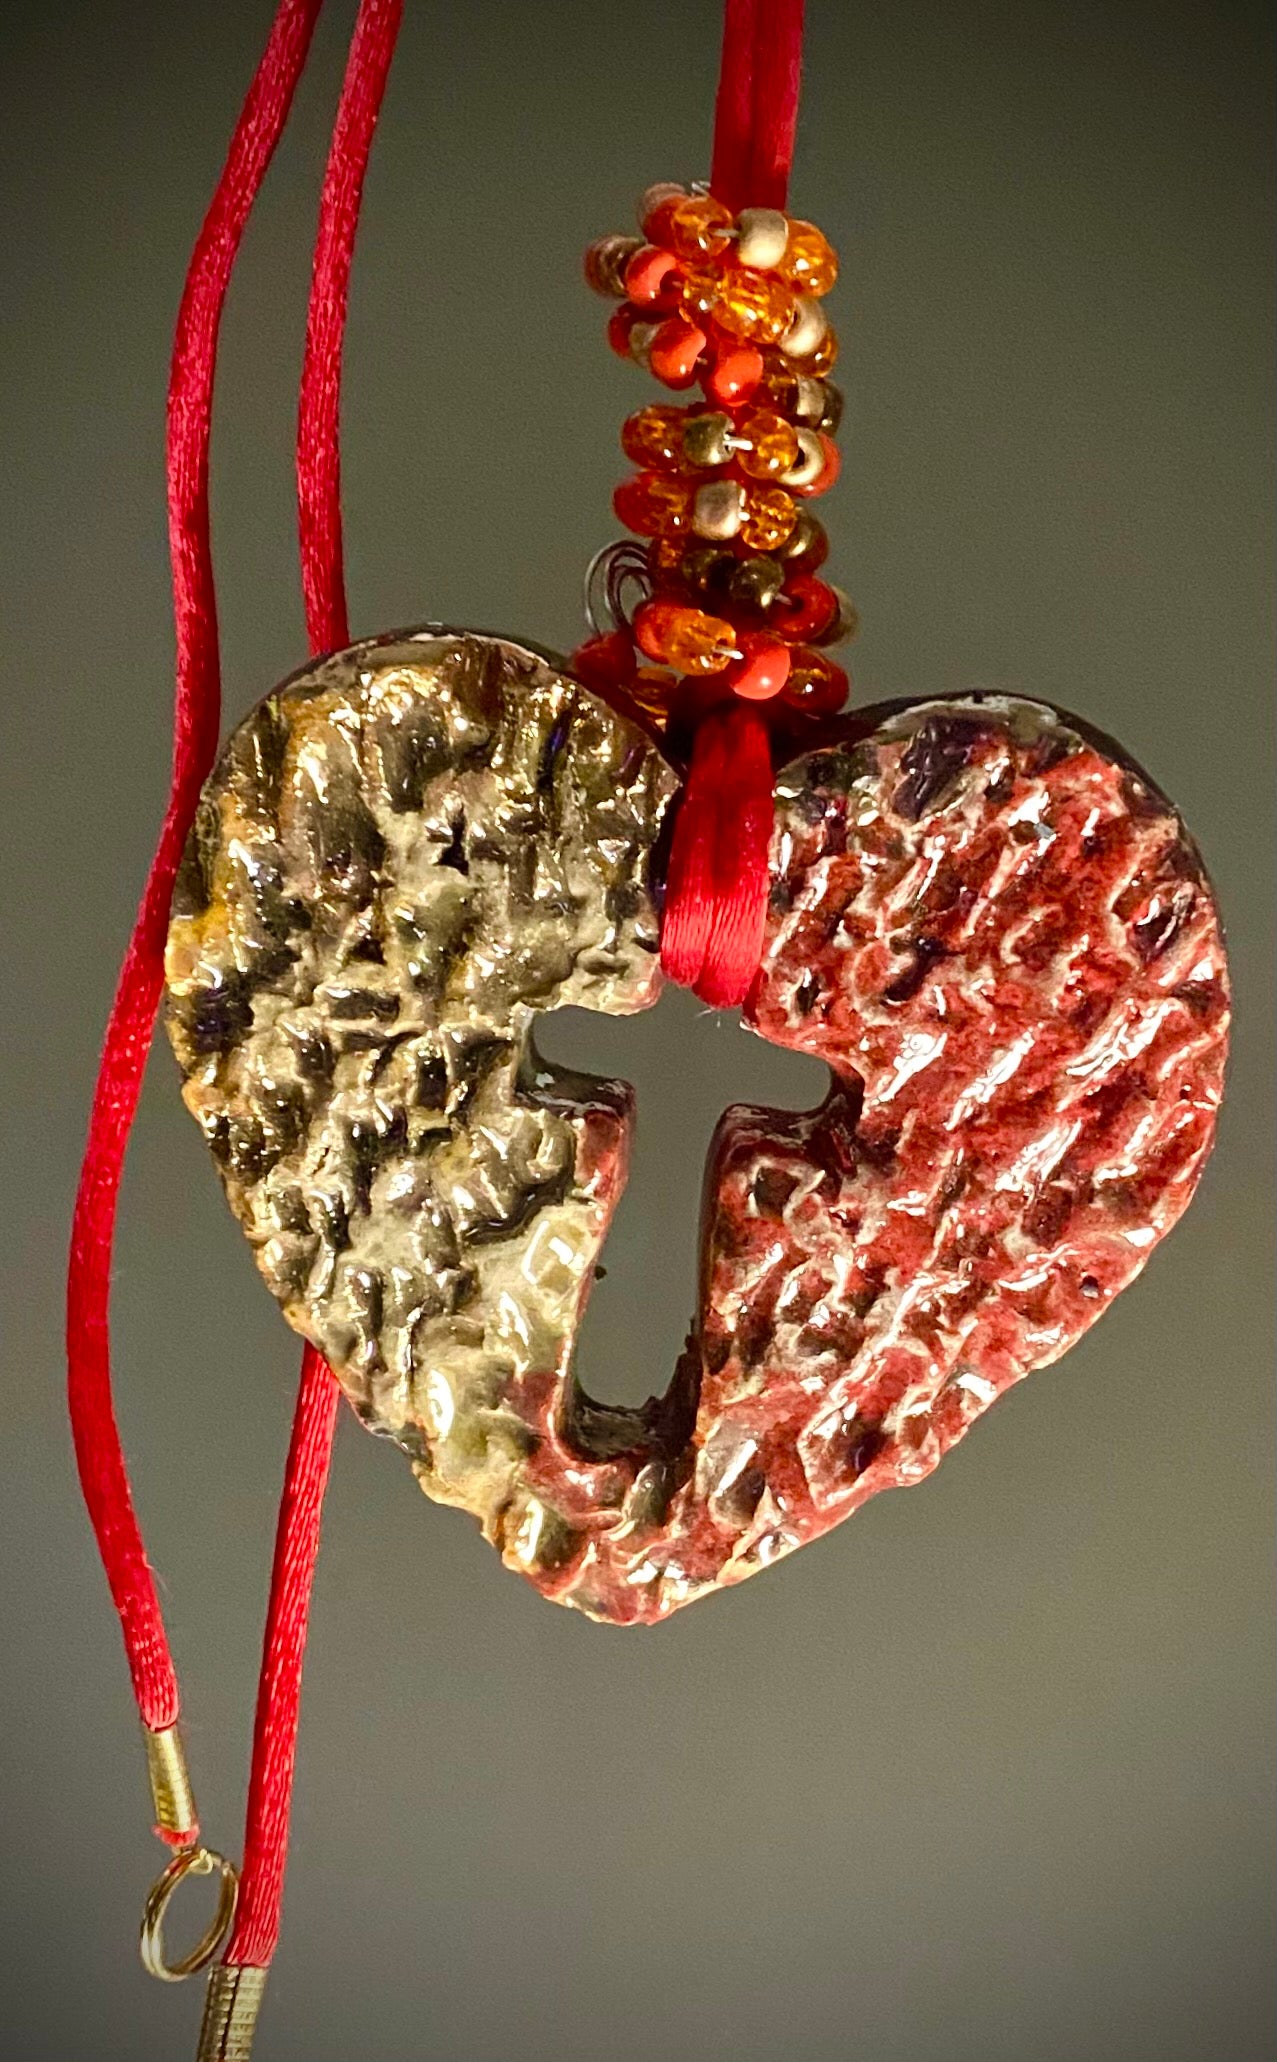 Have A Heart ! Each heart pendant is handmade with love! It is 3"x 3" and weighs approx. 3ozs. This pendant has a copper gold metallic raku glazes that renders a unique translucent  patina. The heart has a textured pattern . It holds a spiral of red mini beads on a spiral copper wire. This pendant has a nice 12" red suede cord!